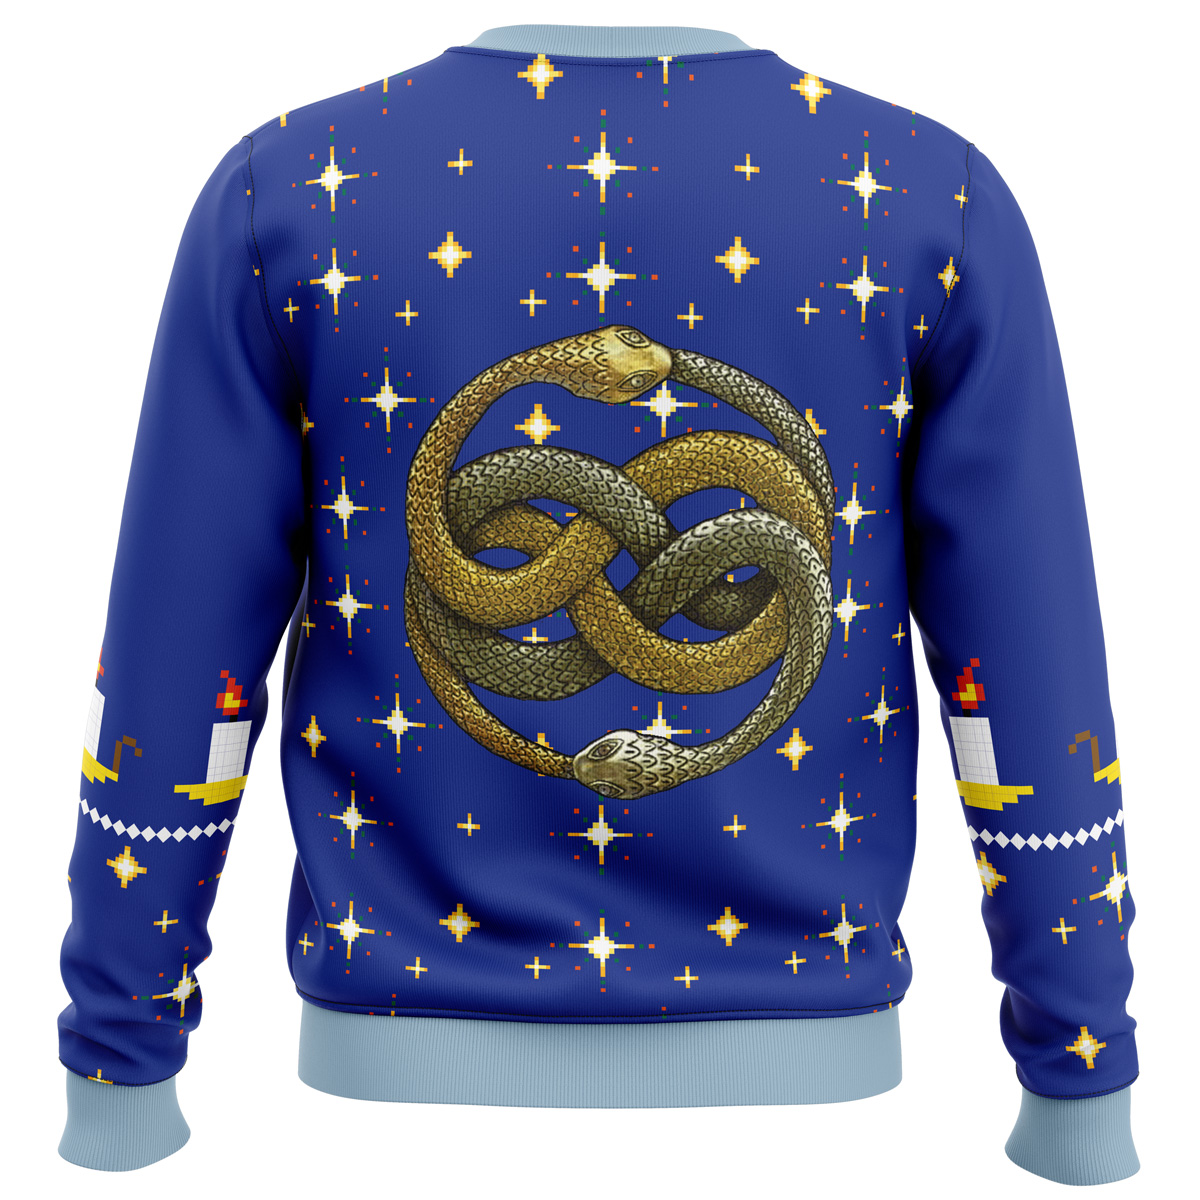 The NeverEnding Story Ugly Christmas Sweater